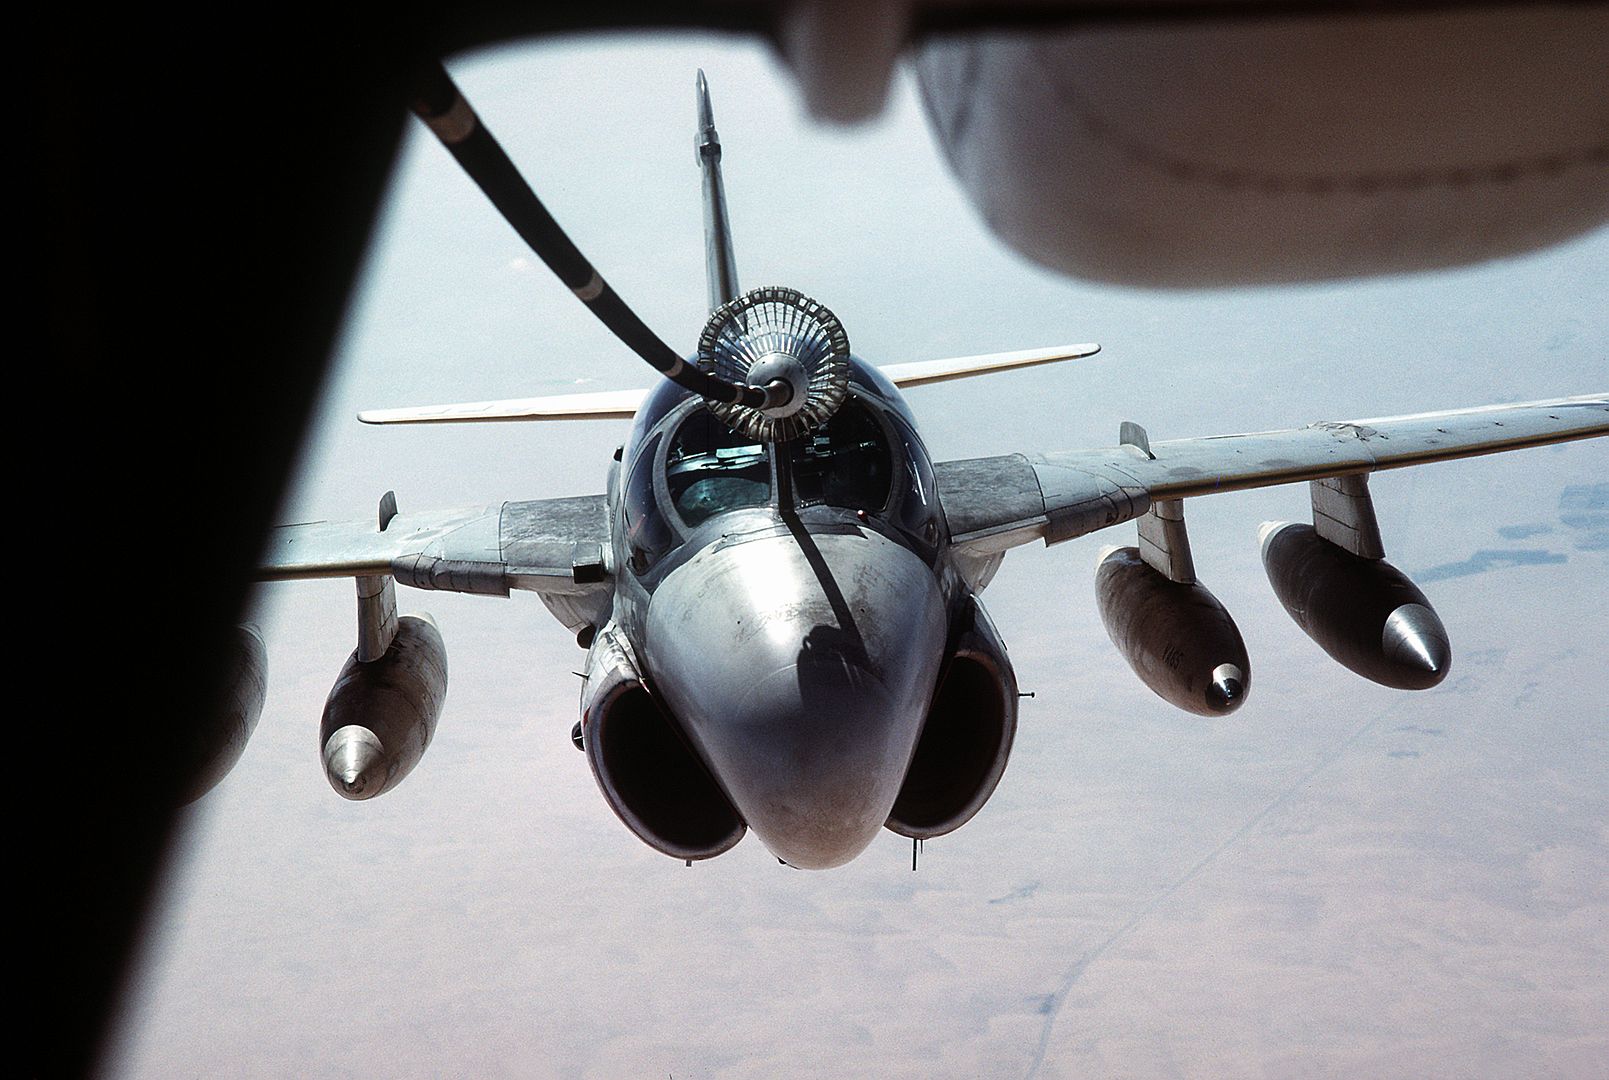 A 6 Intruder Aircraft From A KC 10 Extender Aircraft For In Flight Refueling During The Joint Exercise Bright Start 83